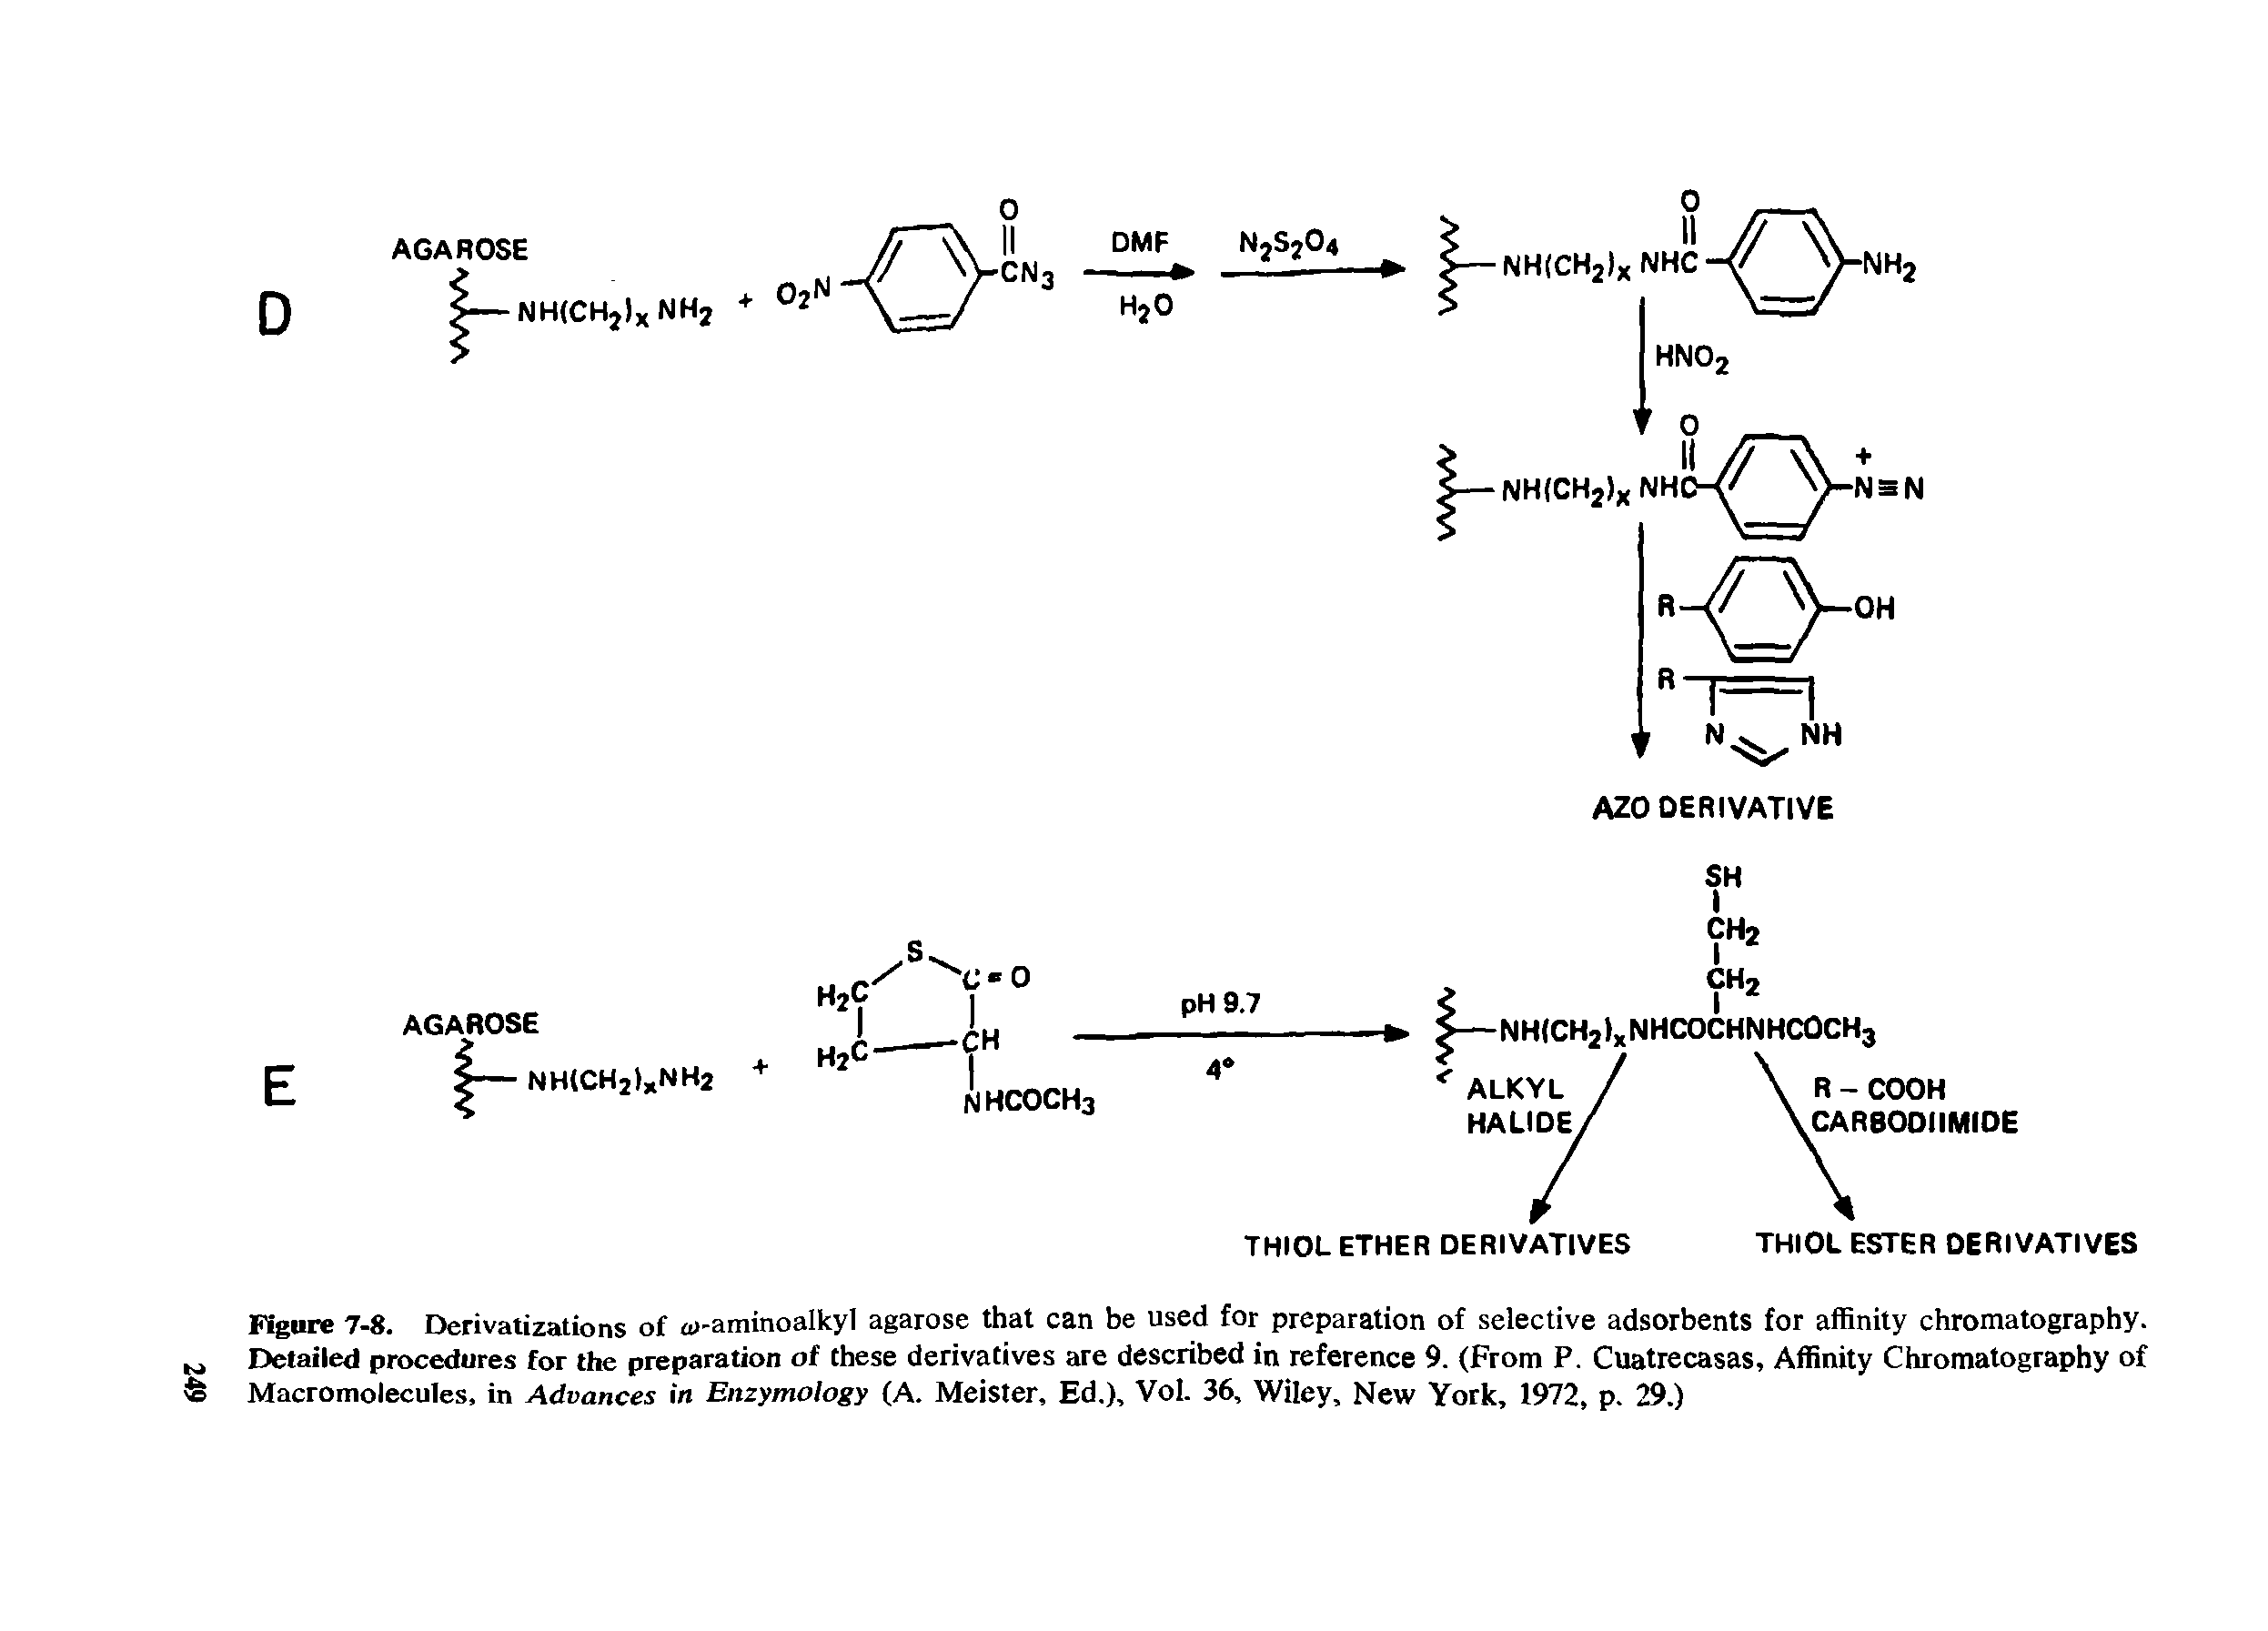 Figure 7-8. Derivatizations of aj-aminoalkyl agarose that can be used for preparation of selective adsorbents for affinity chromatography. Detailed procedures for the preparation of these derivatives are described in reference 9. (From P. Cuatrecasas, Affinity Chromatography of Macromolecules, in Advances in Enzymology (A. Meister, Ed.), Vol. 36, Wiley, New York, 1972, p. 29.)...